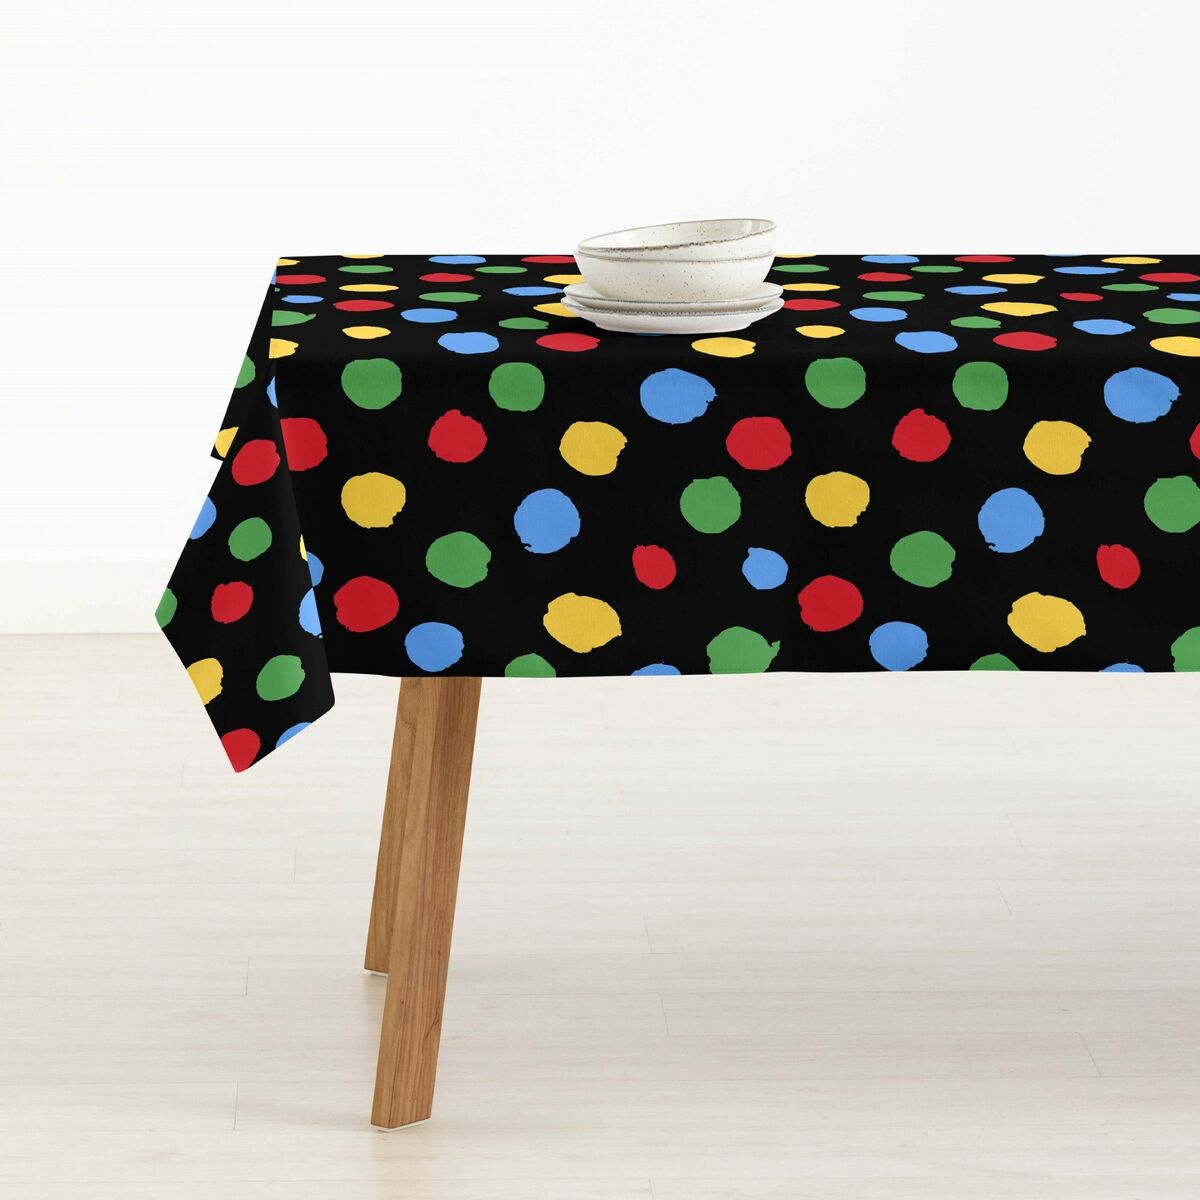 Stain-proof tablecloth Belum 0120-369 250 x 140 cm